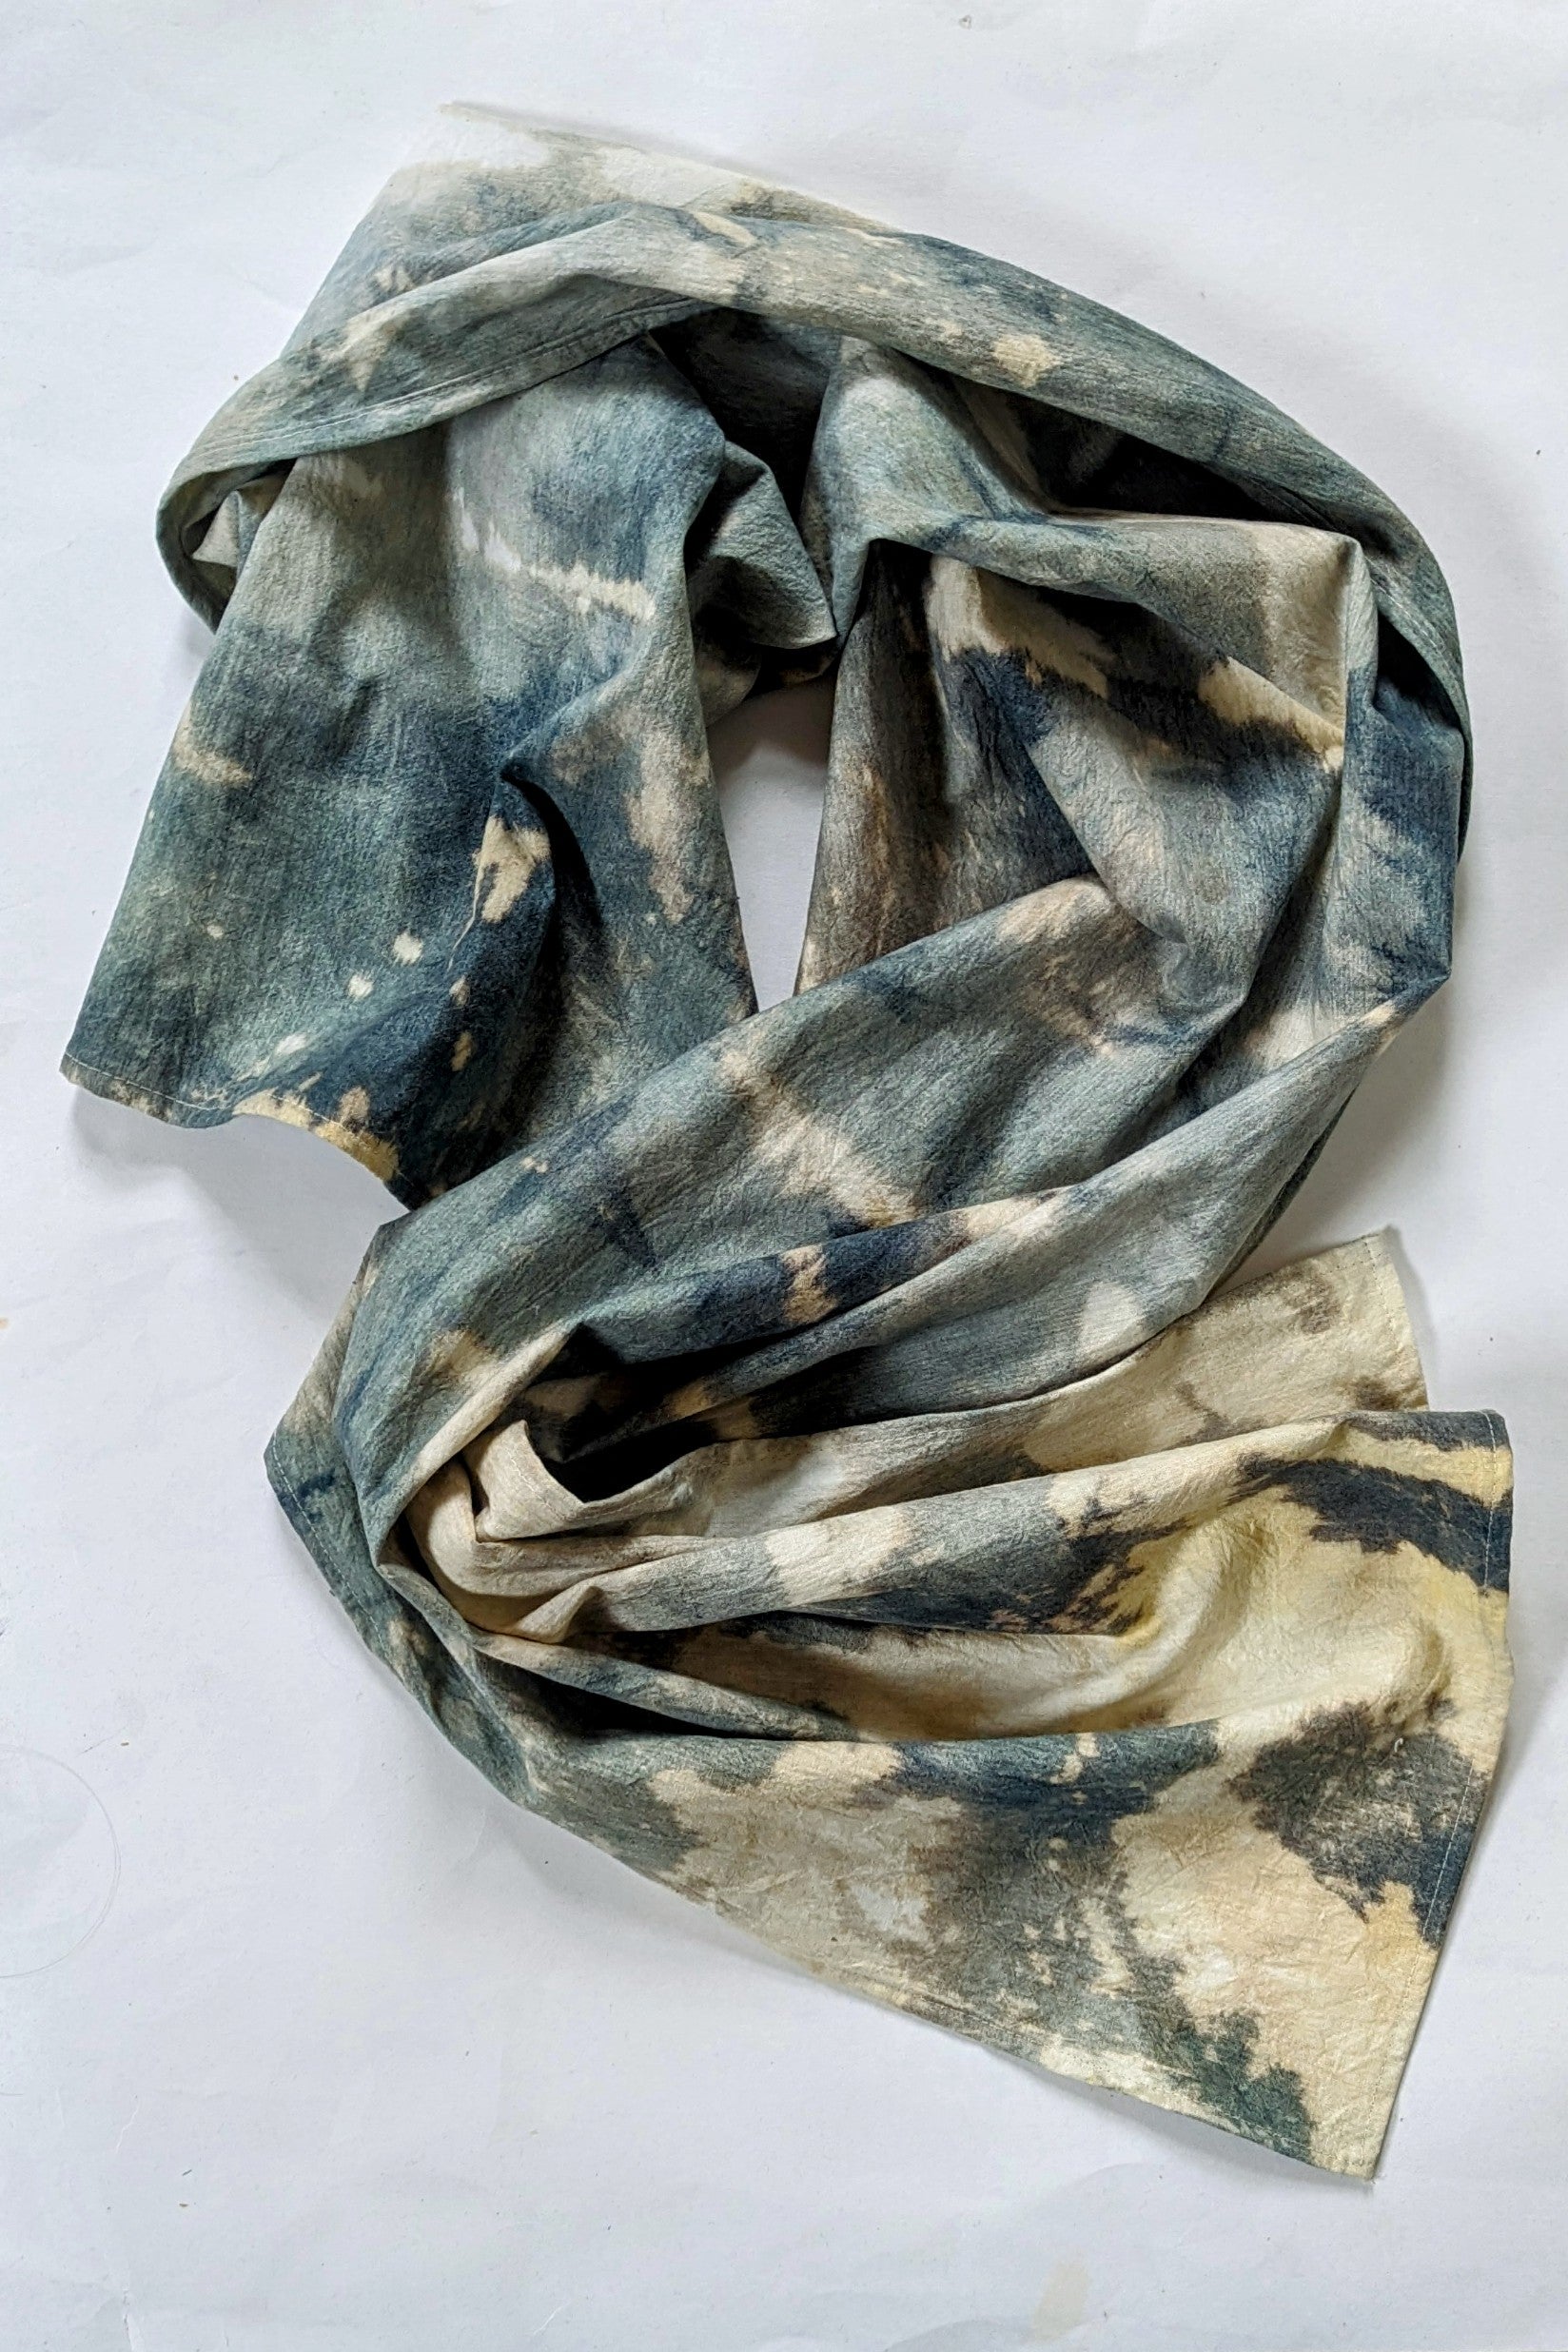 Hand Dyed Organic Cotton Scarf by Connally Goods